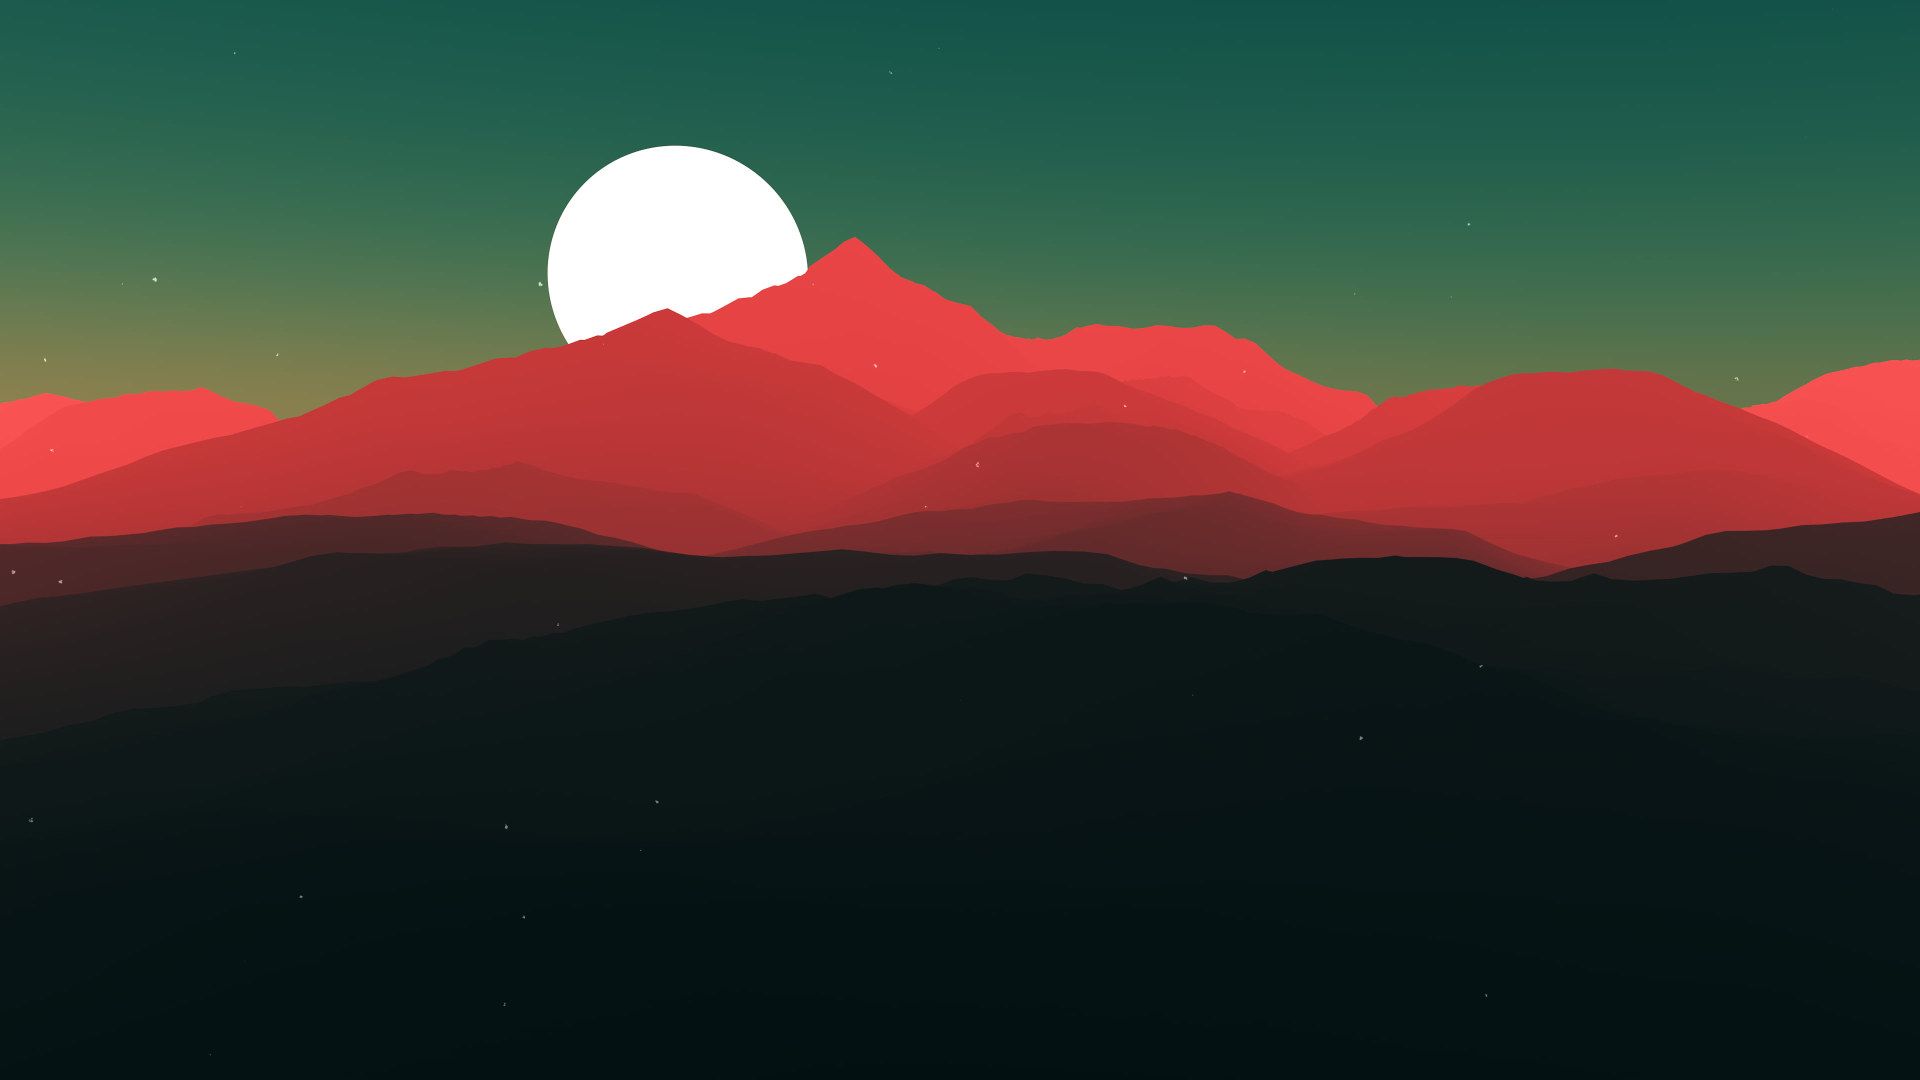 Red mountains and moon digital wallpaper, red mountain illustration • Wallpaper For You HD Wallpaper For Desktop & Mobile